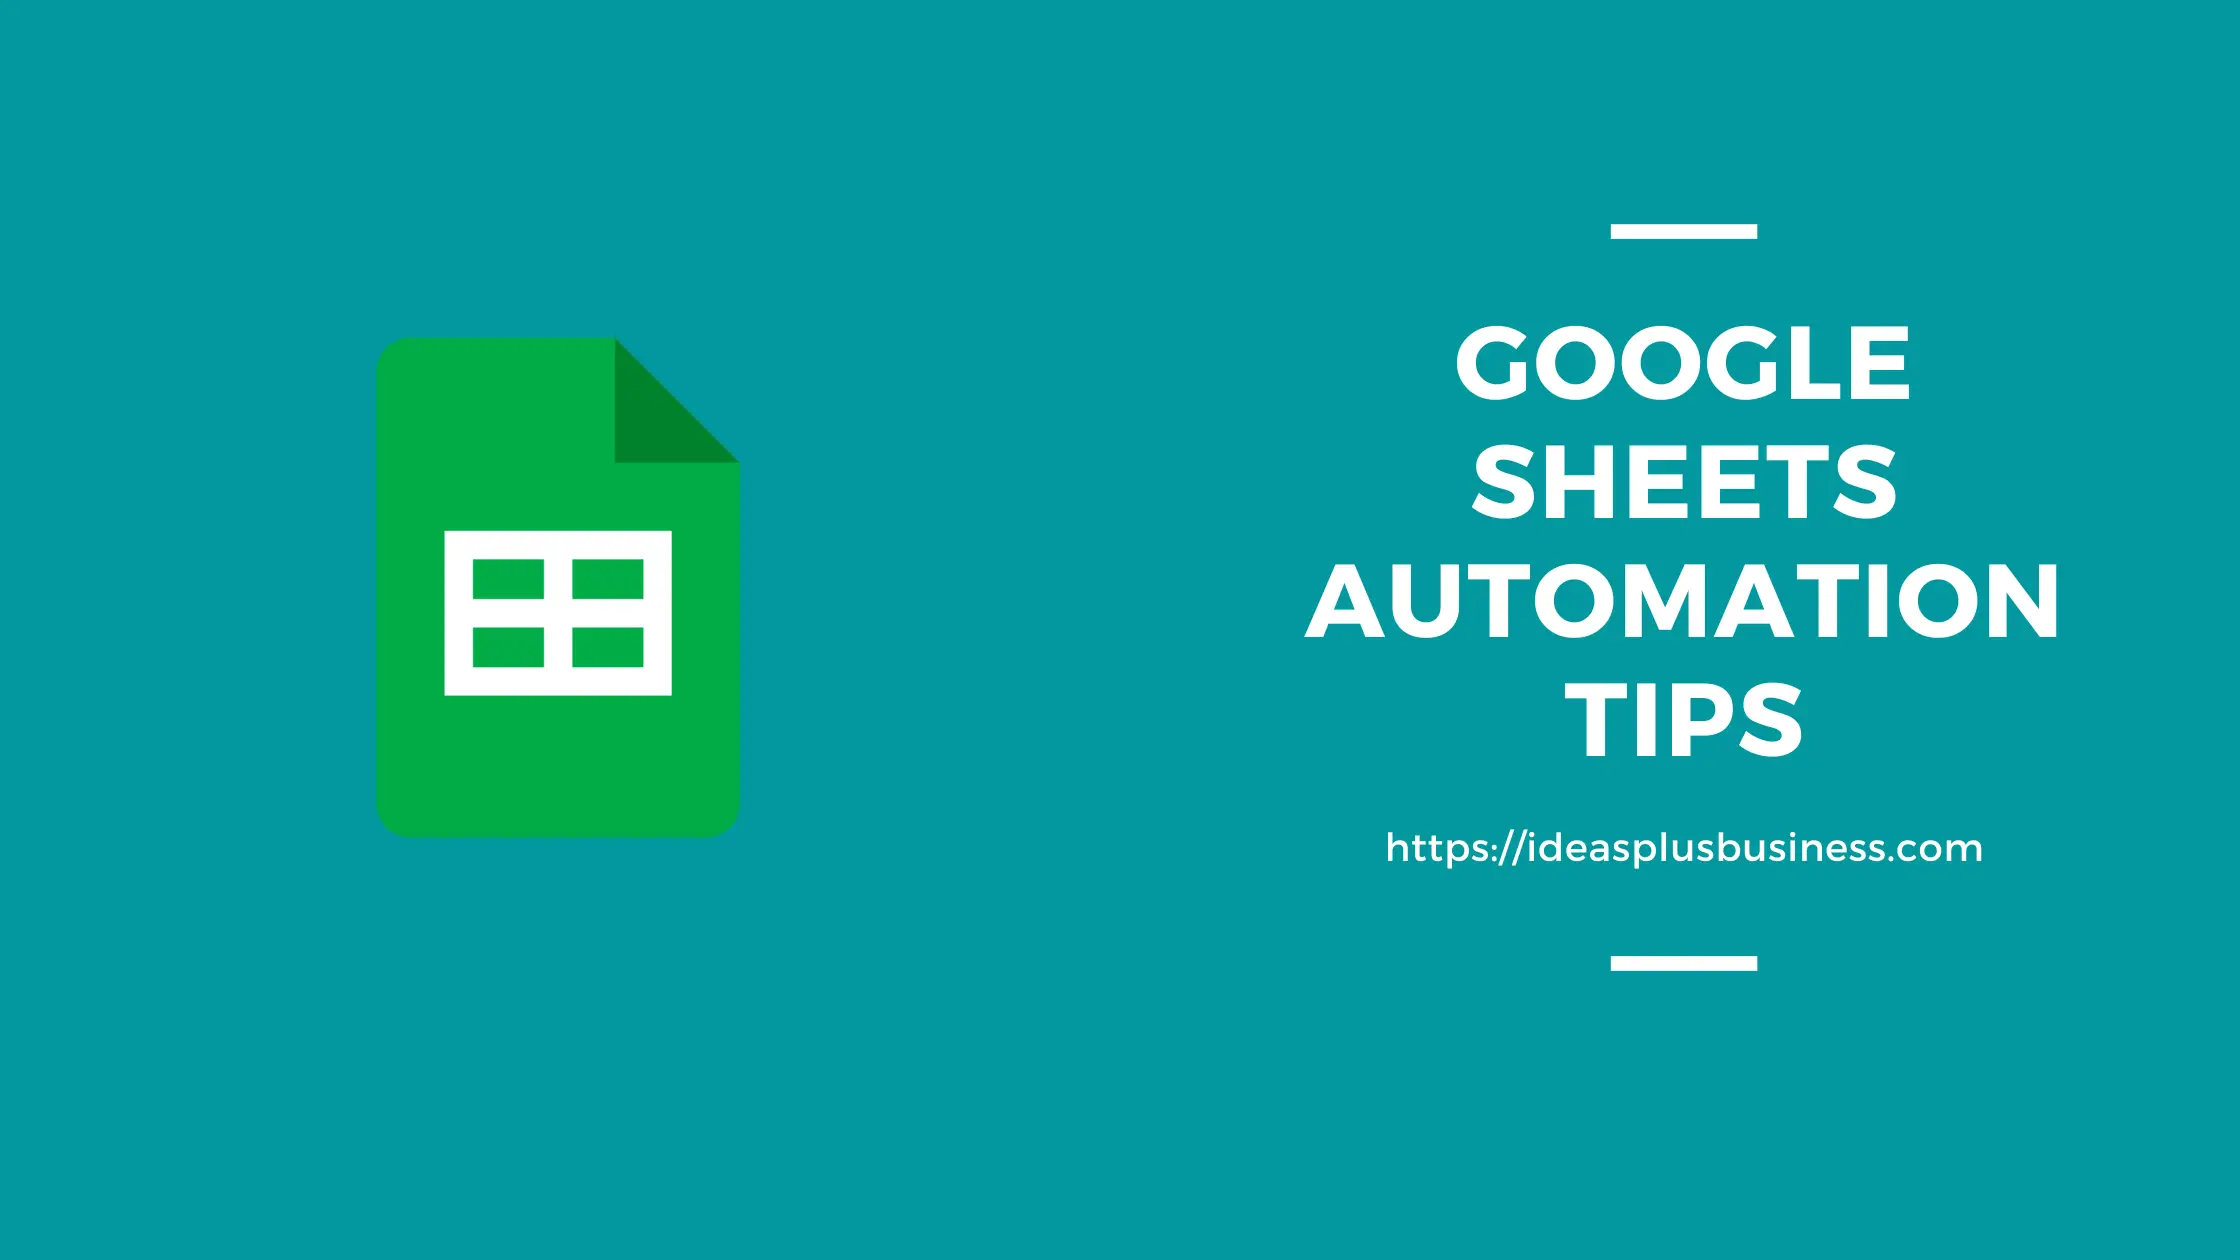 Future-Proofing Security with Google Sheets Automation